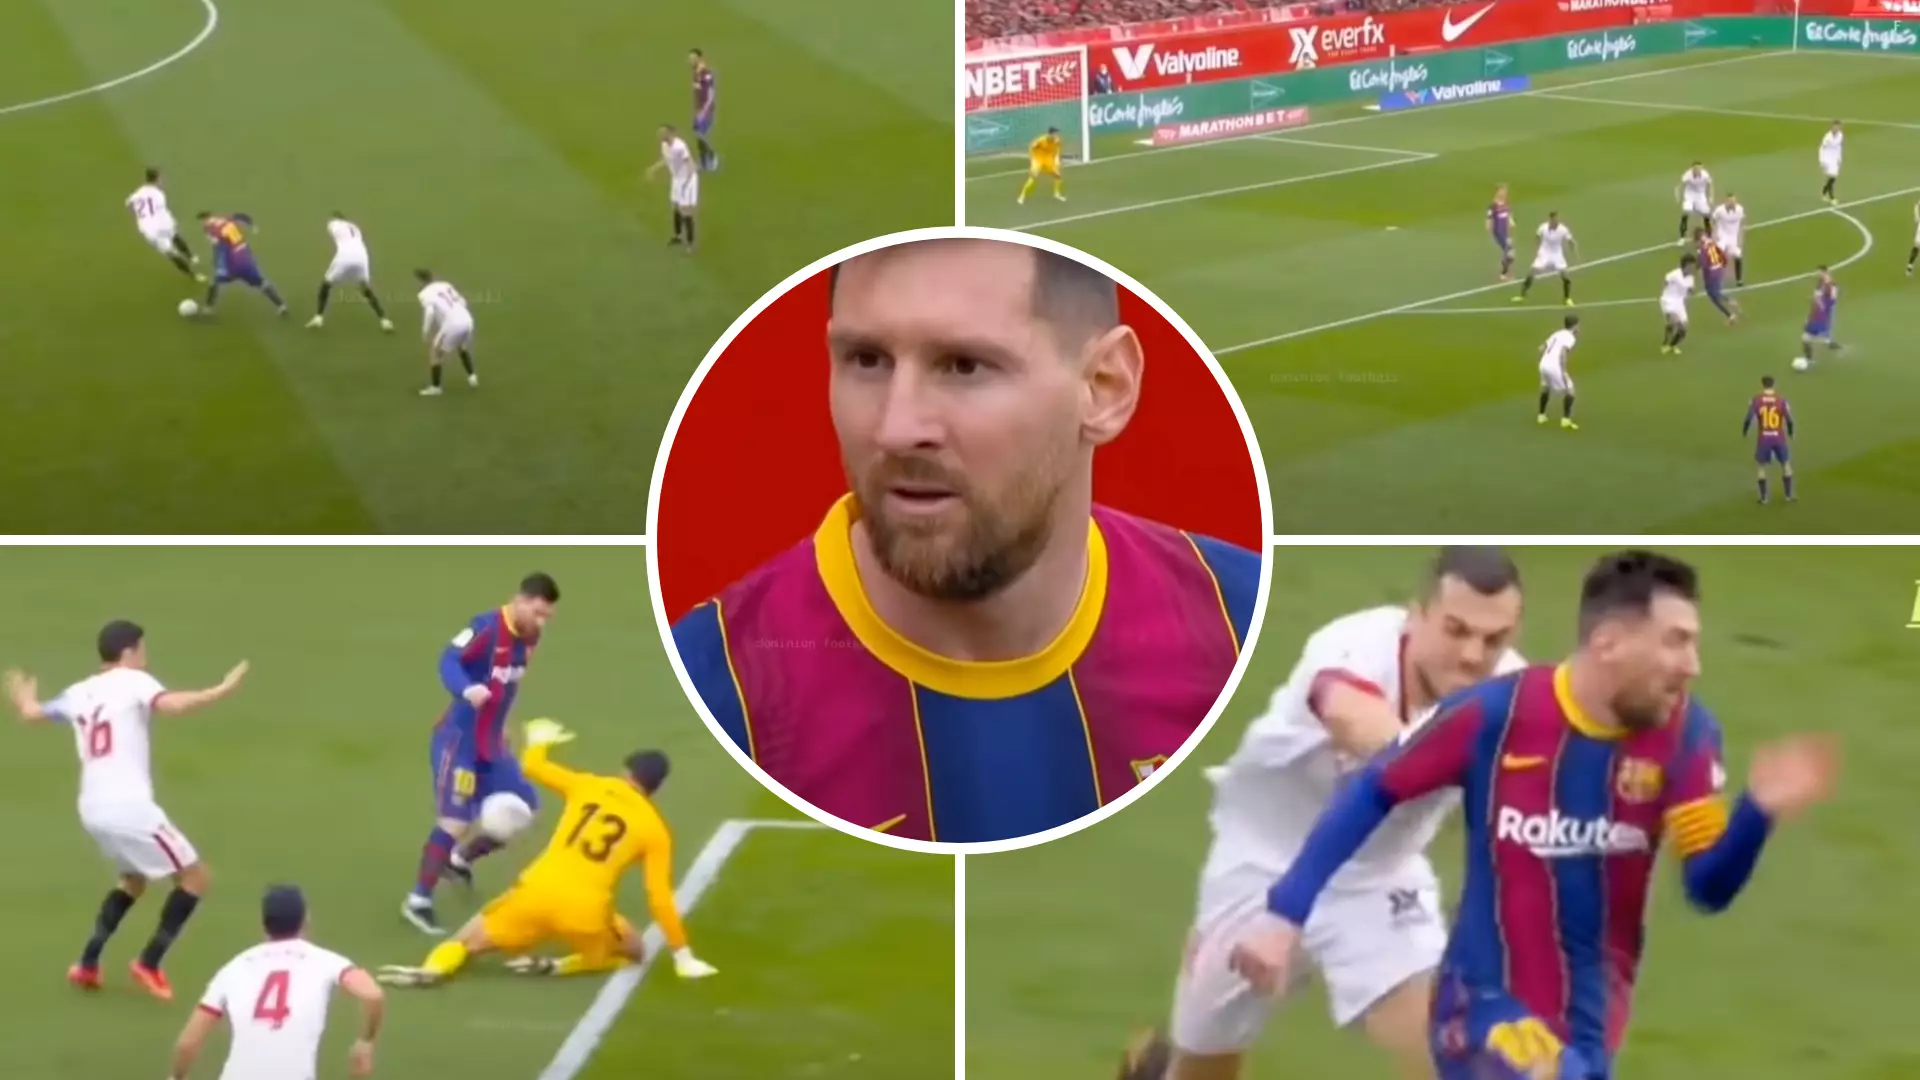 Lionel Messi Compilation Vs Sevilla Shows Why He Is Back To His World-Class Best For Barcelona